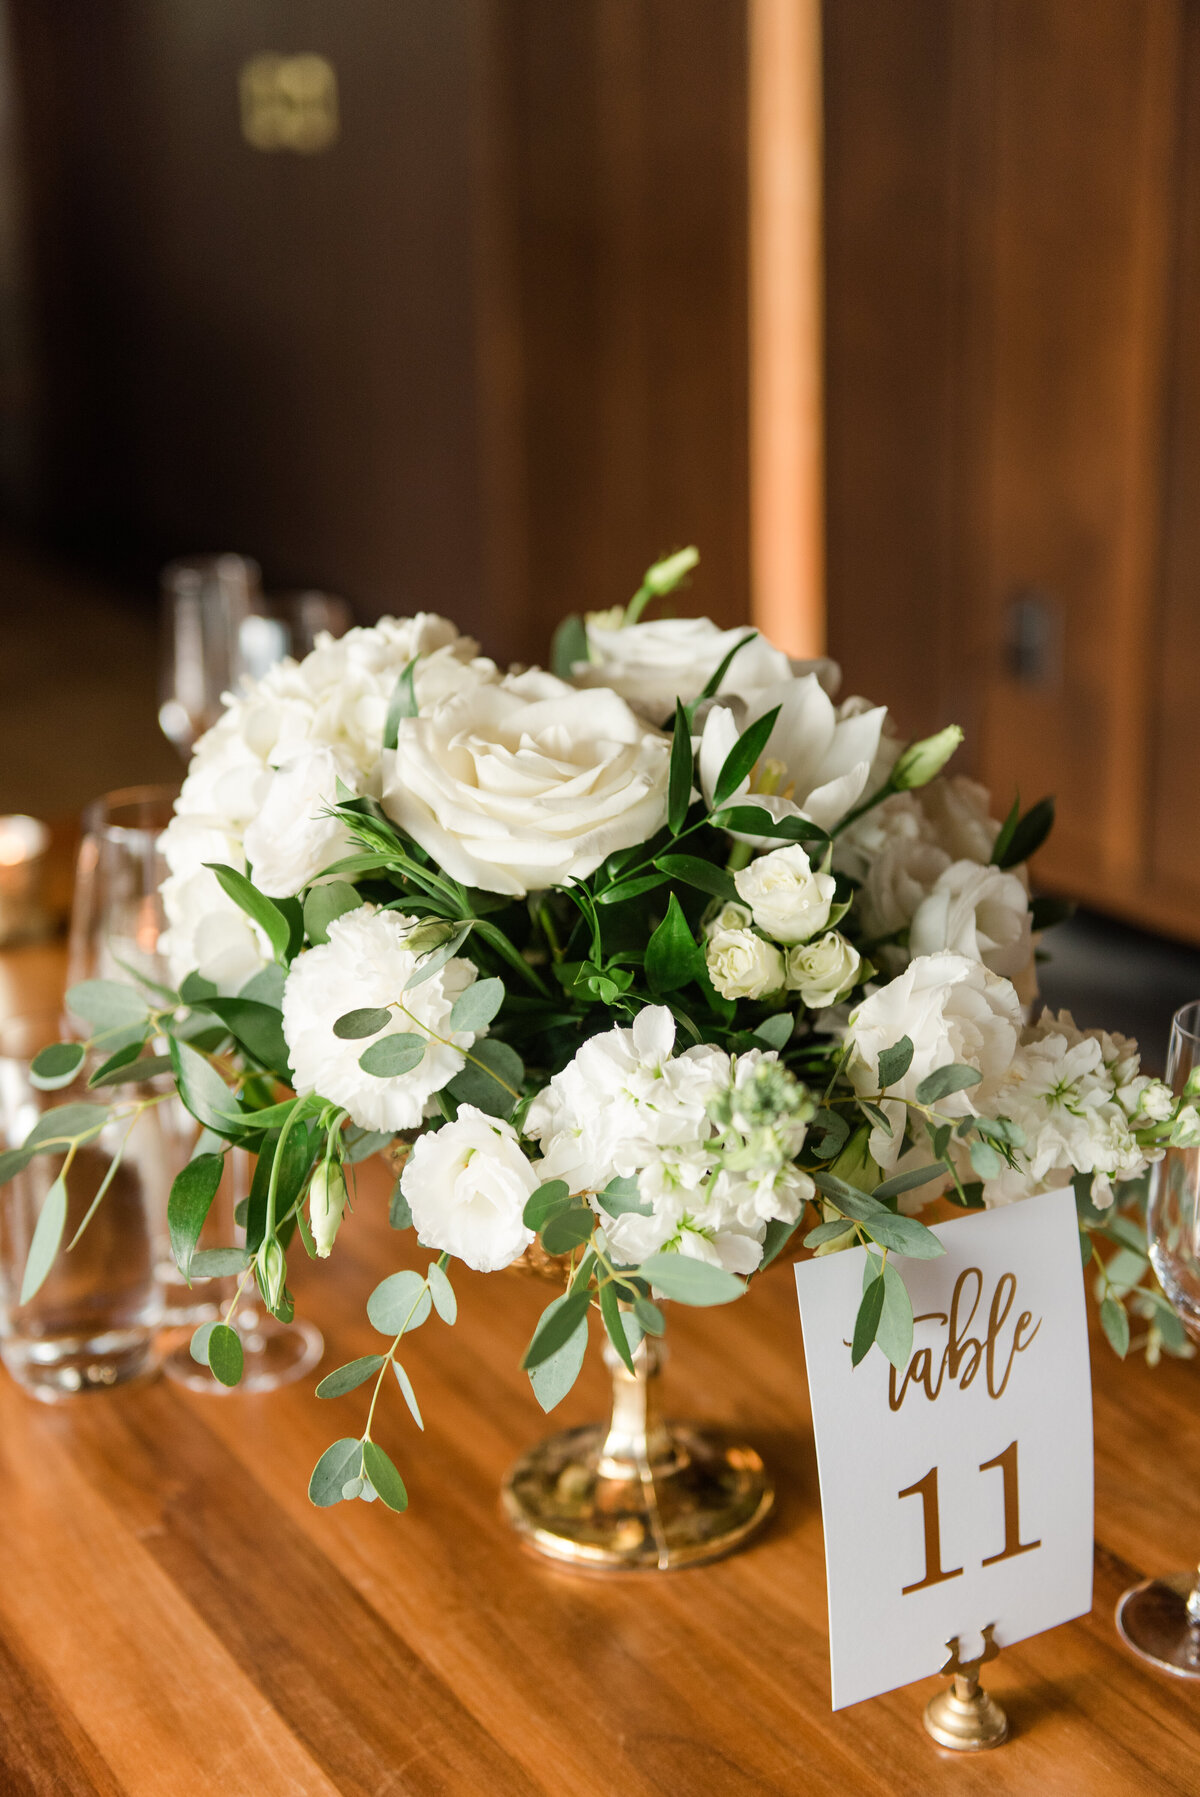 White floral arrangement for a  wedding reception table in a gold mercury glass compote